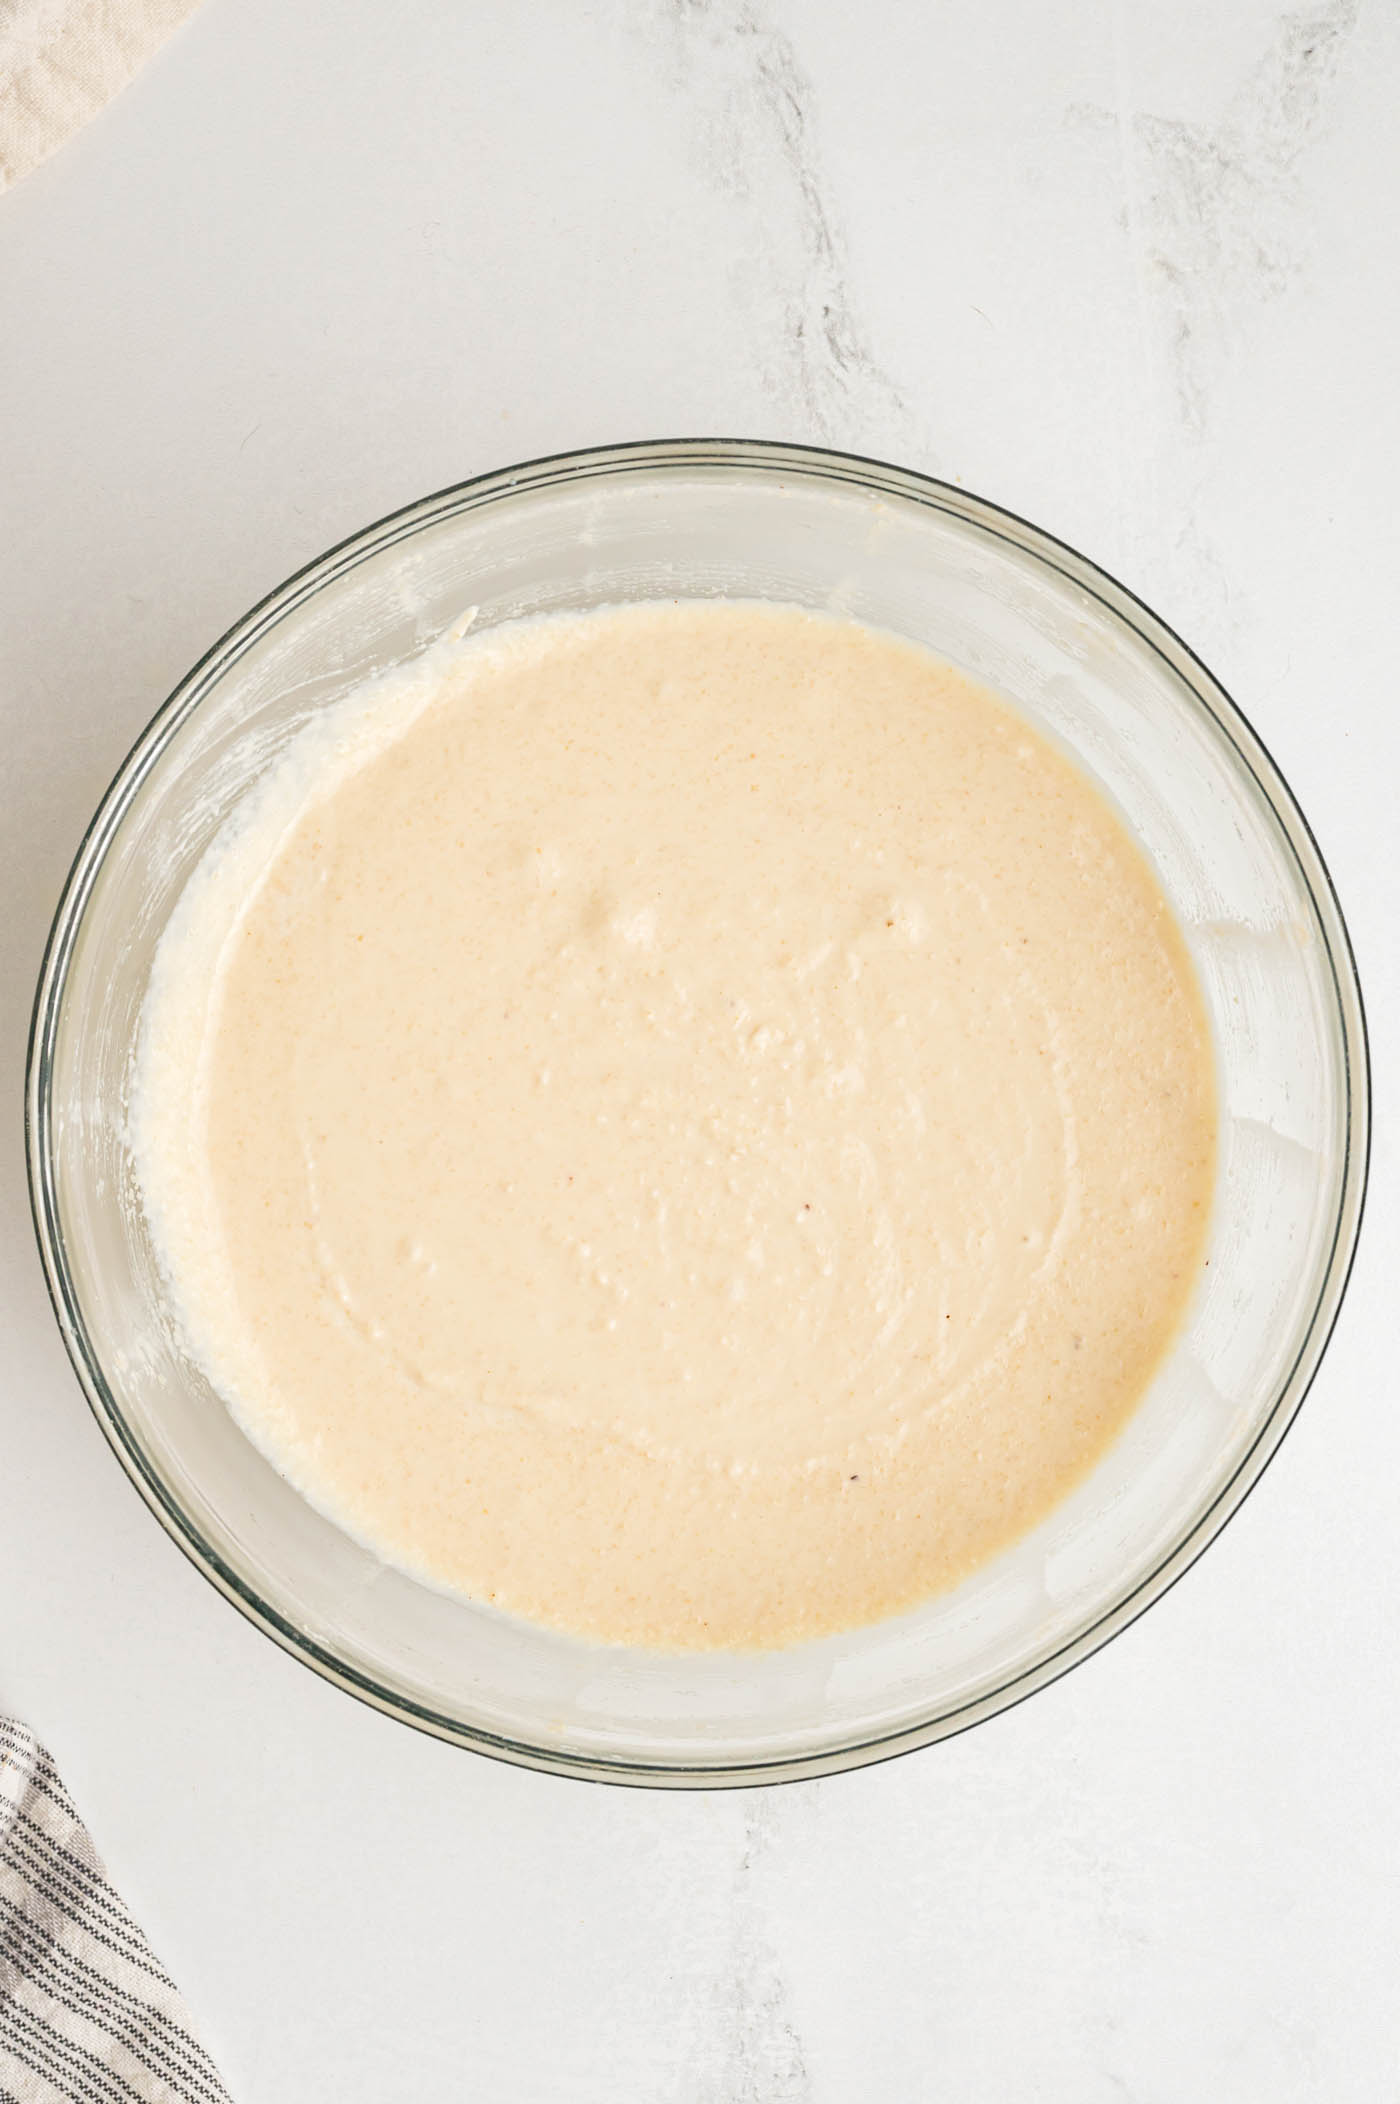 A cream cheese-like beige cream in a glass mixing bowl.